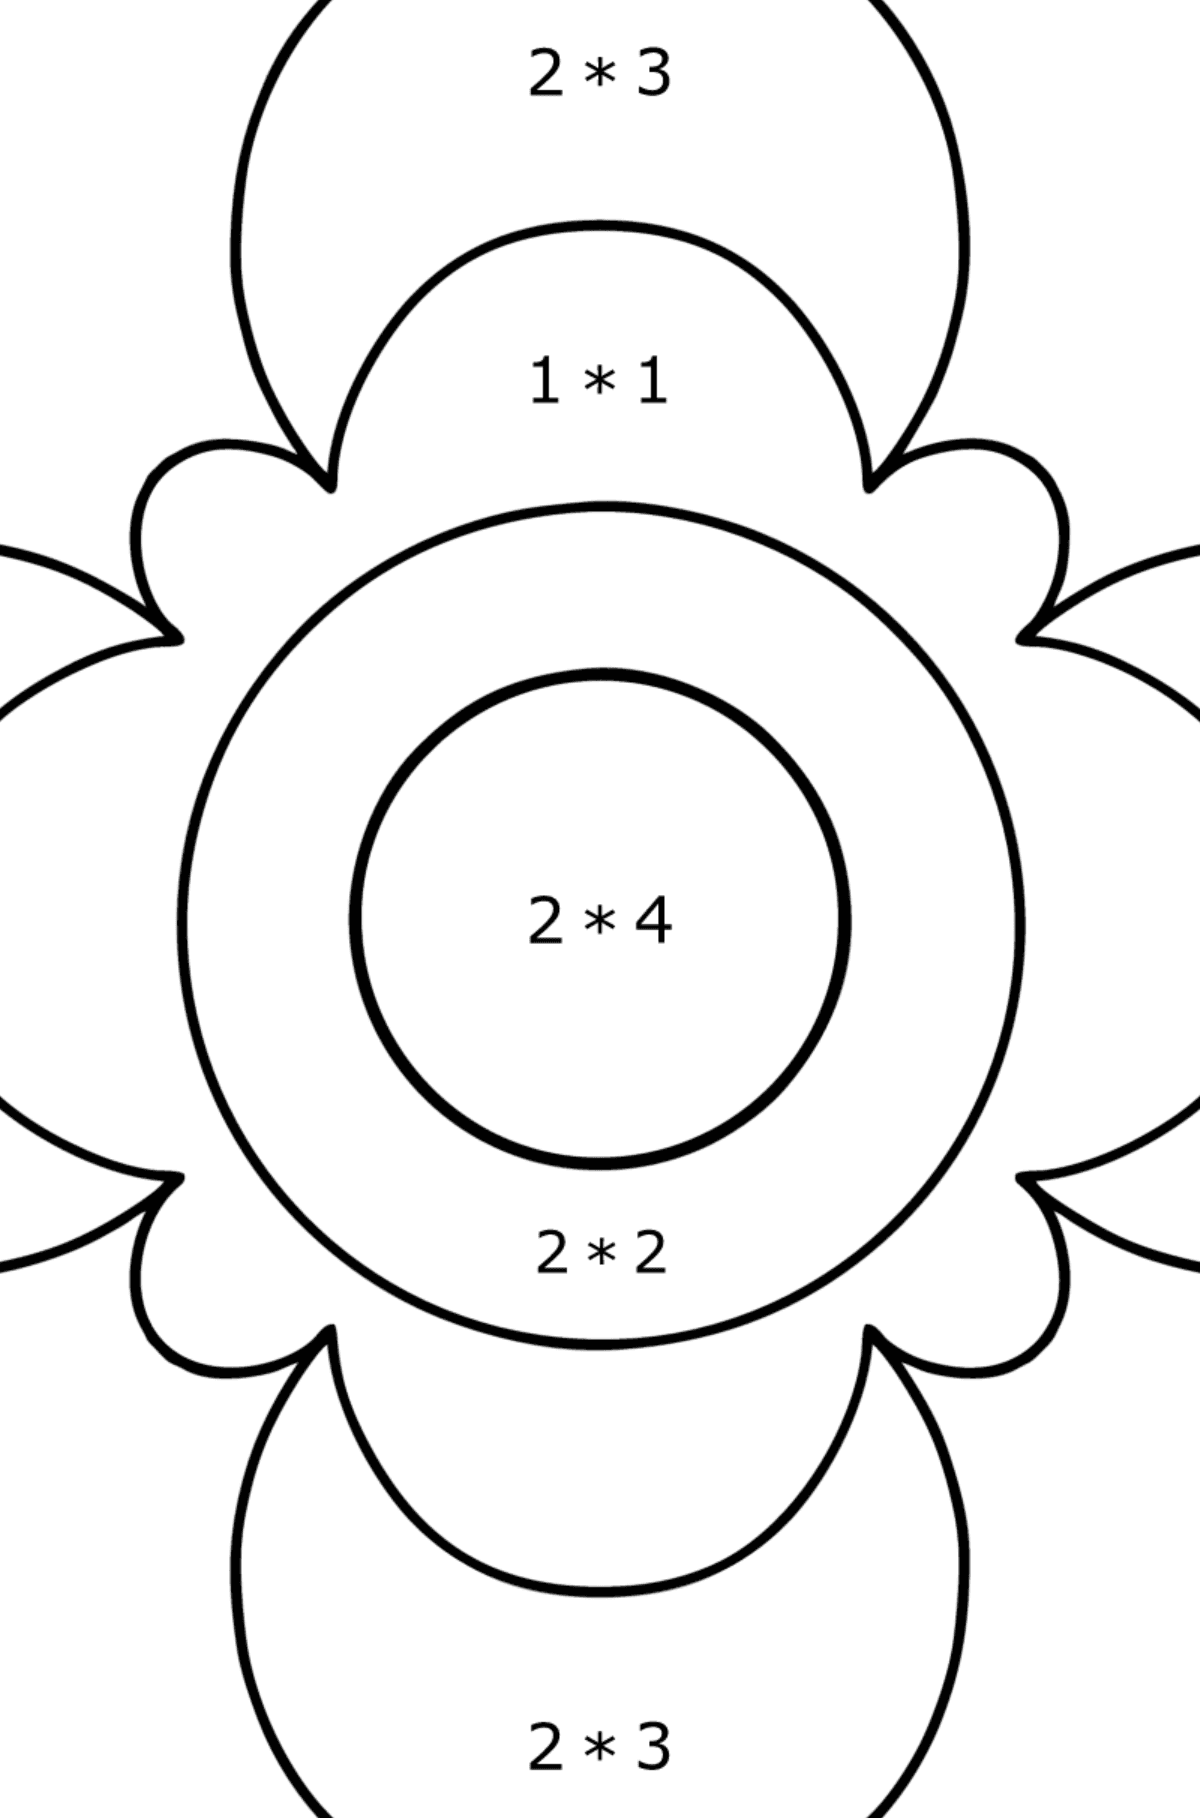 Coloring Anti stress flower for kids - Math Coloring - Multiplication for Kids